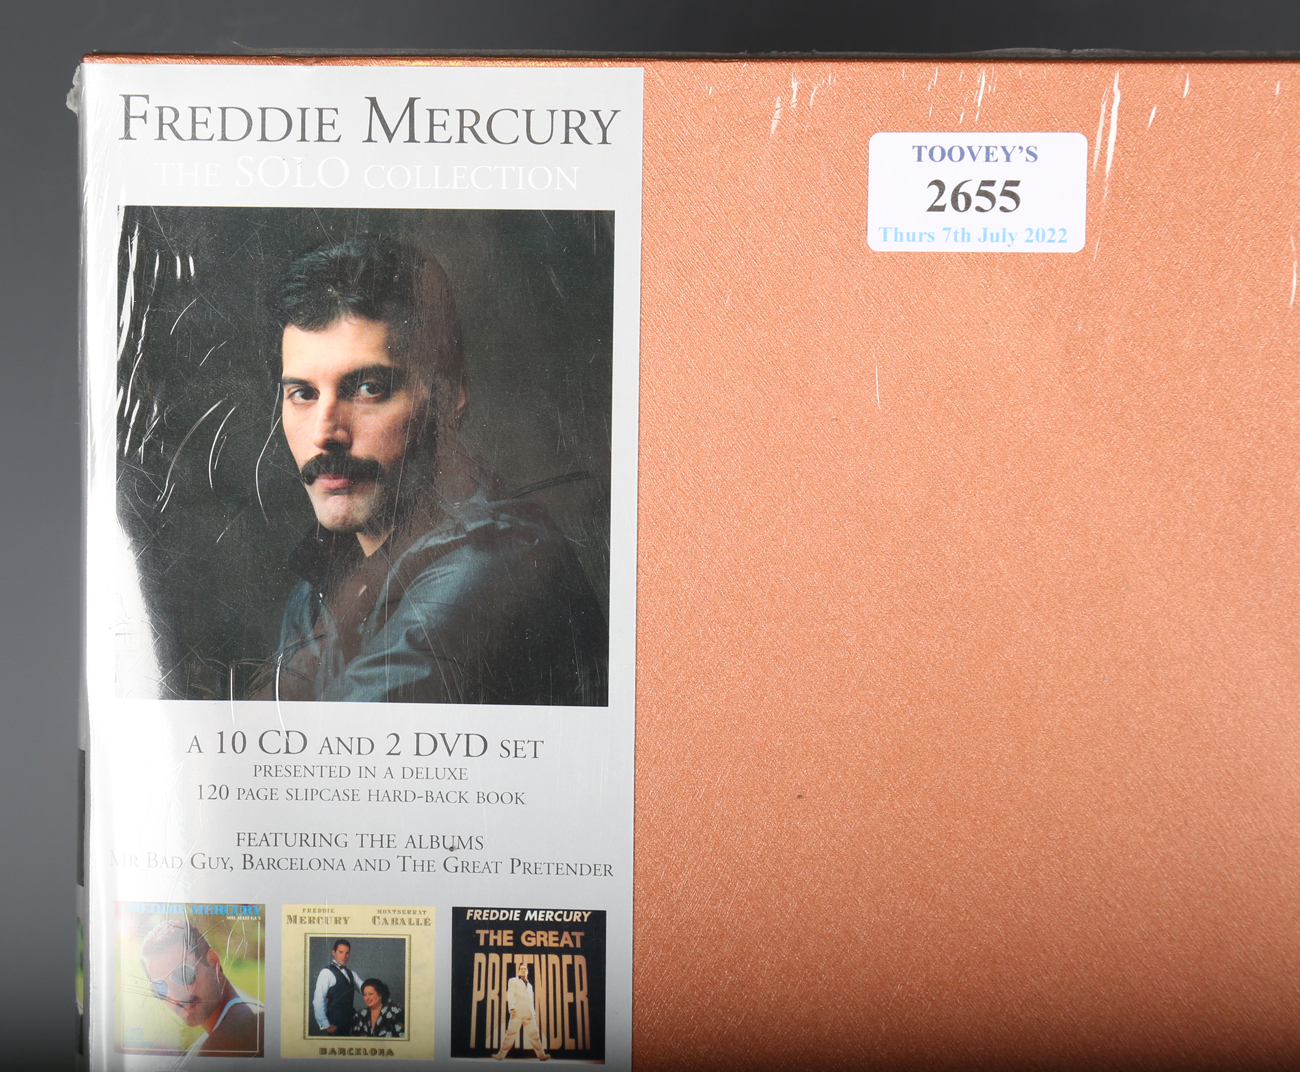 A ten-CD and two-DVD box set, 'Freddie Mercury - The Solo